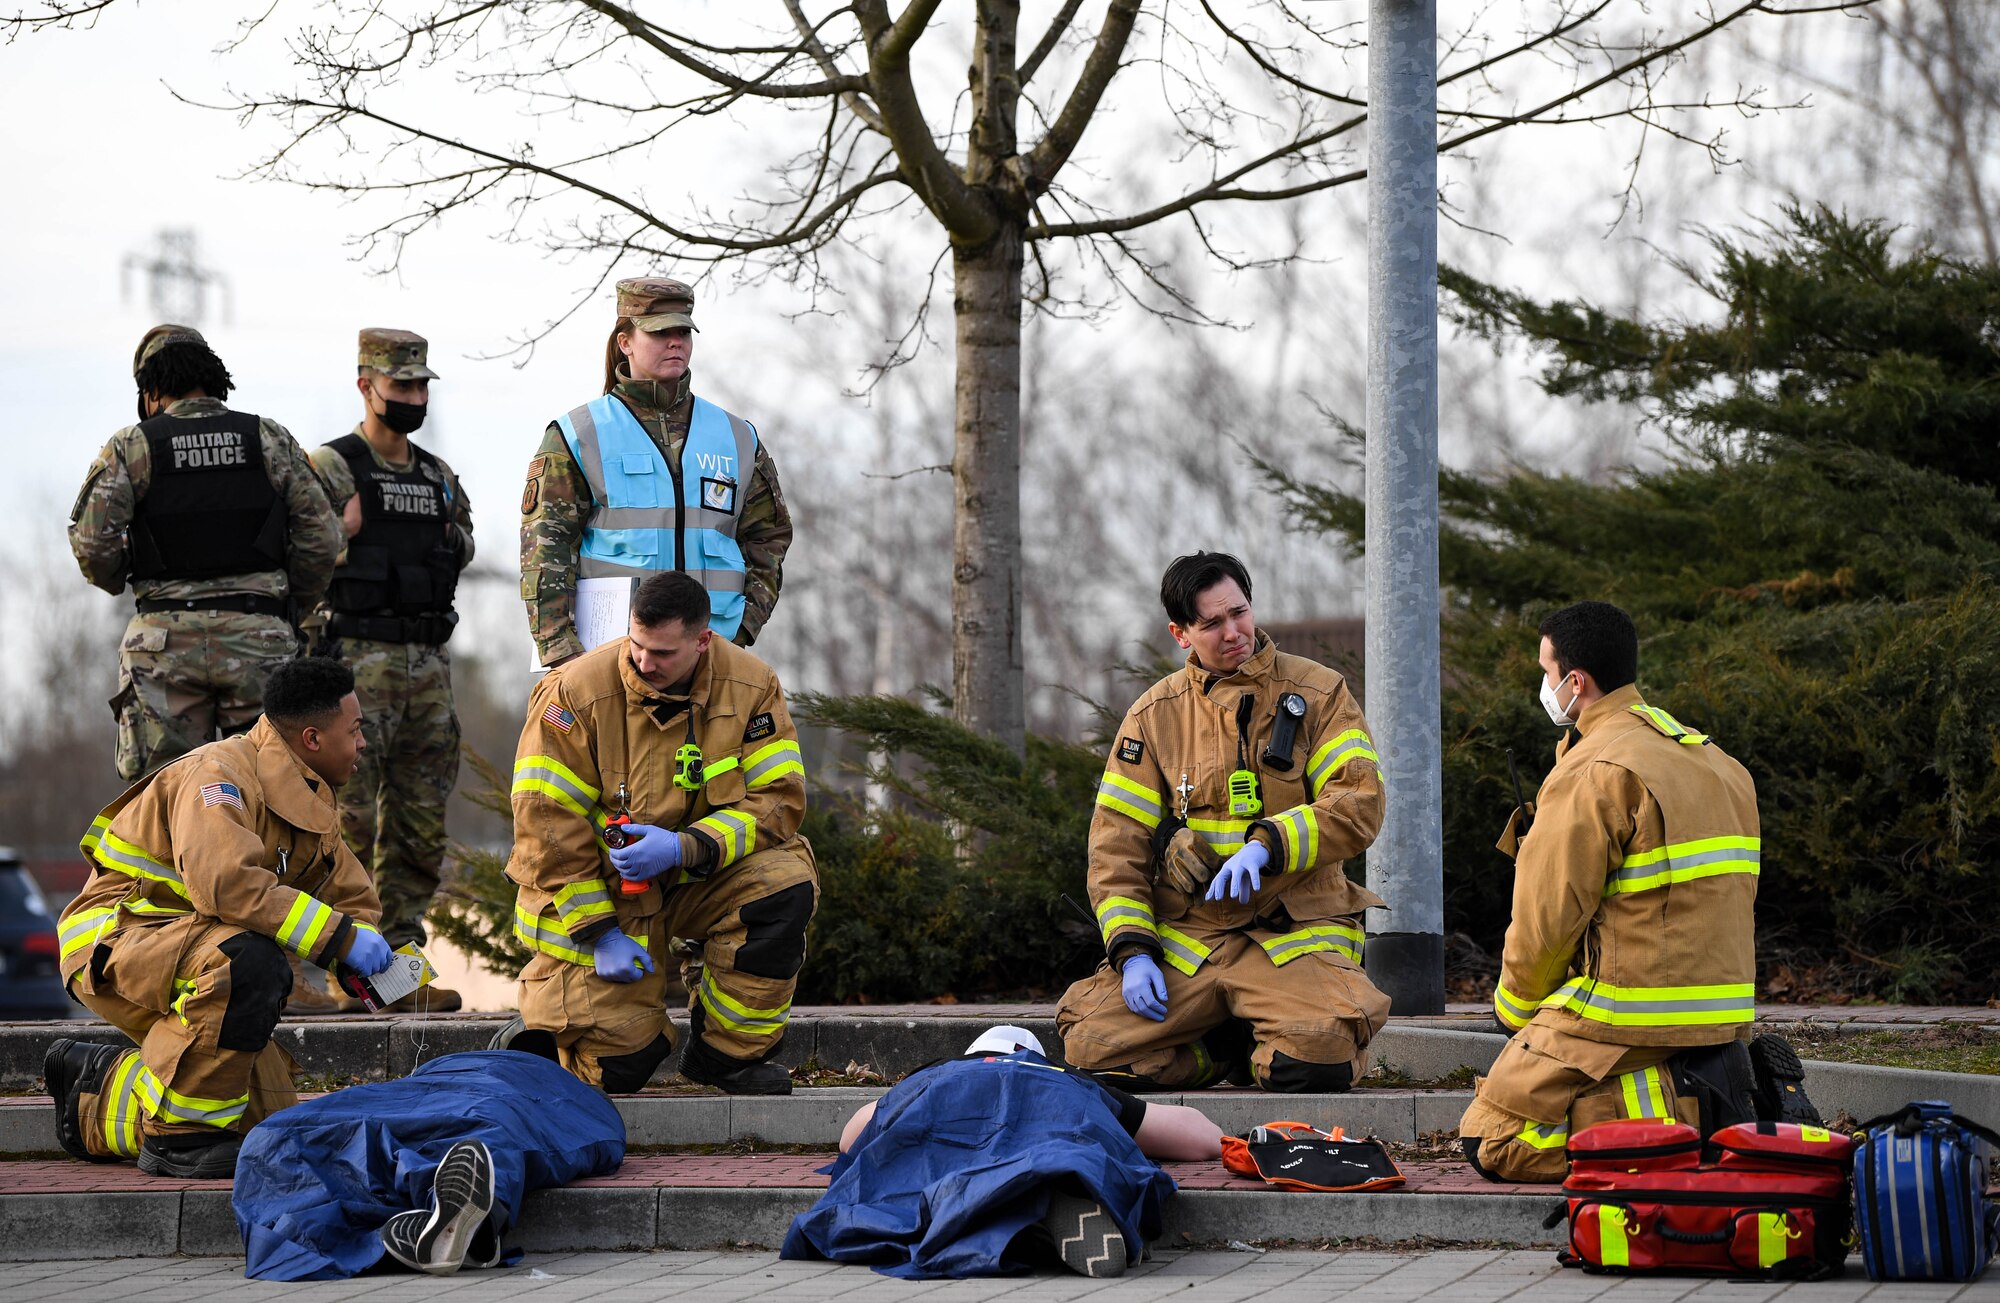 Airmen assigned to the Kaiserslautern Military Community participate in an active shooter readiness exercise during exercise Operation Varsity 22-1 at Vogelweh Air Base, Germany, March 1, 2022. Wing inspection team members followed Airmen from various groups to collect data on whether or not they followed proper procedures and provided casualties with the care they needed. (U.S. Air Force photo by Airman 1st Class Jared Lovett)